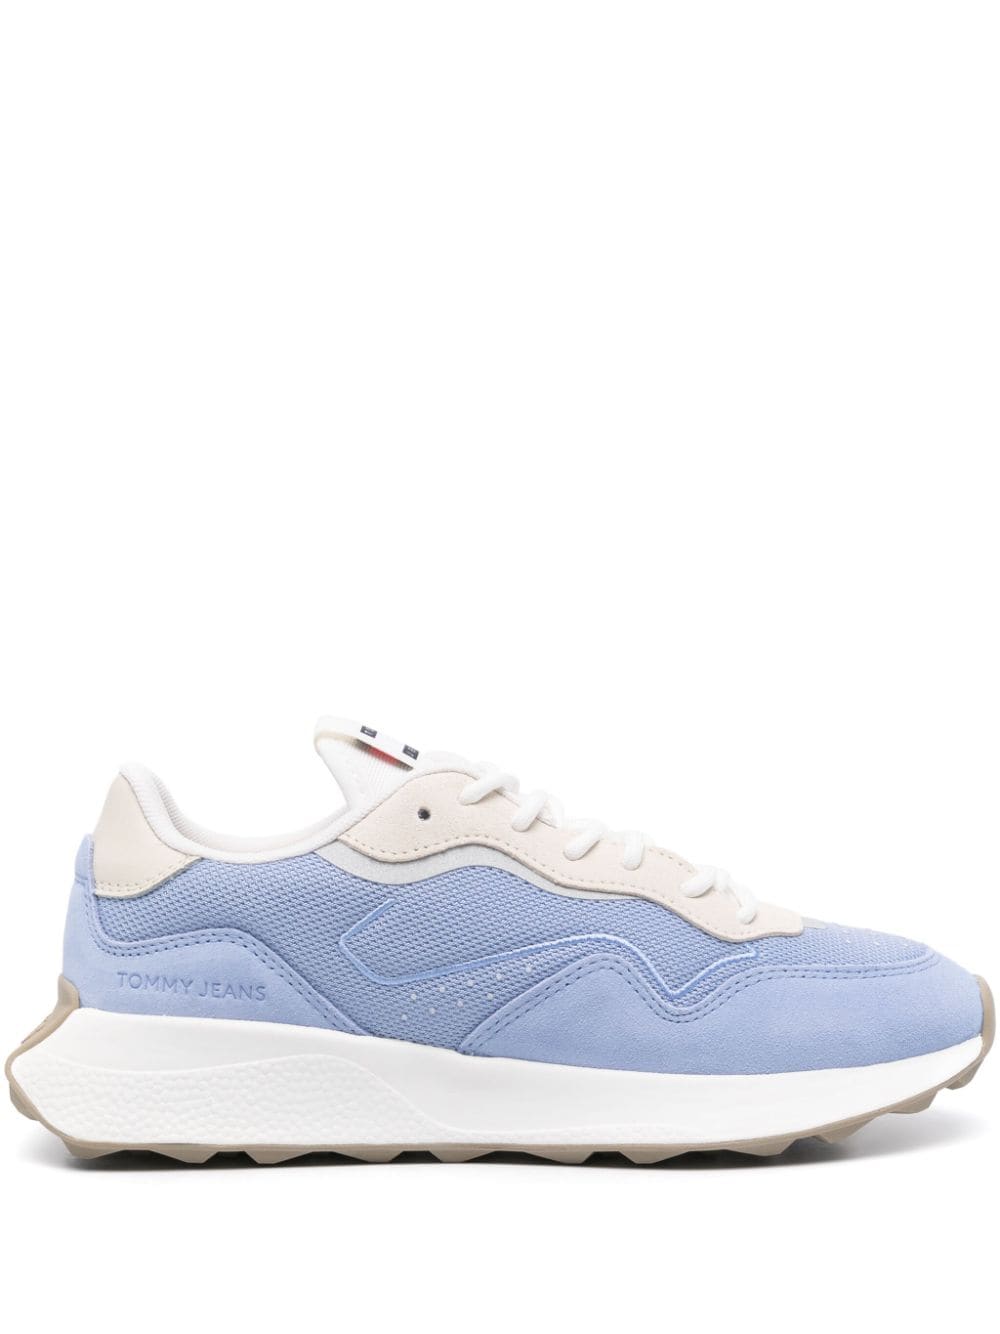 Tommy Hilfiger Retro Panelled Sneakers In Blue